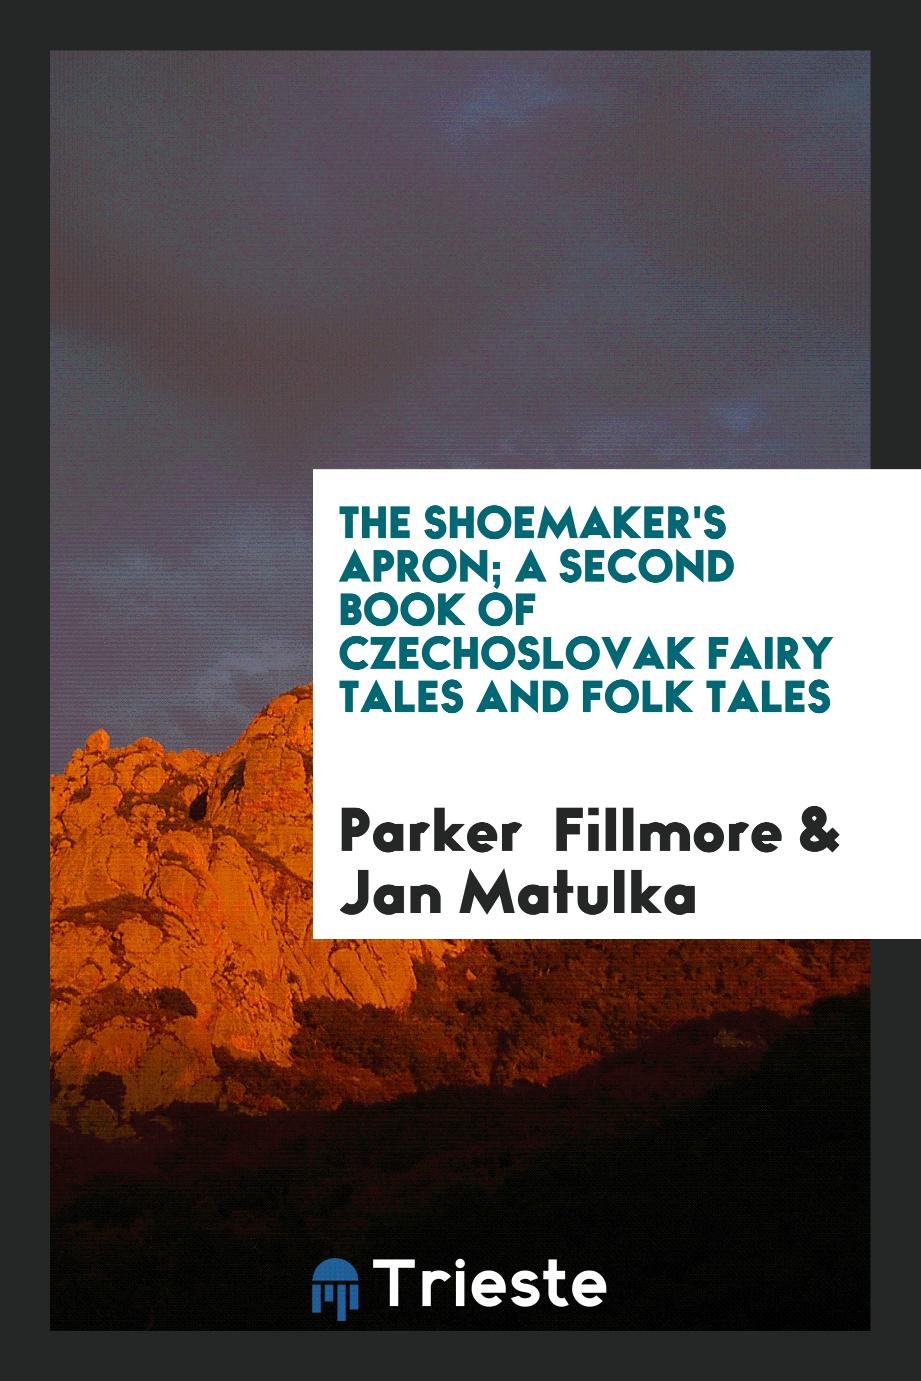 The shoemaker's apron; a second book of Czechoslovak fairy tales and folk tales